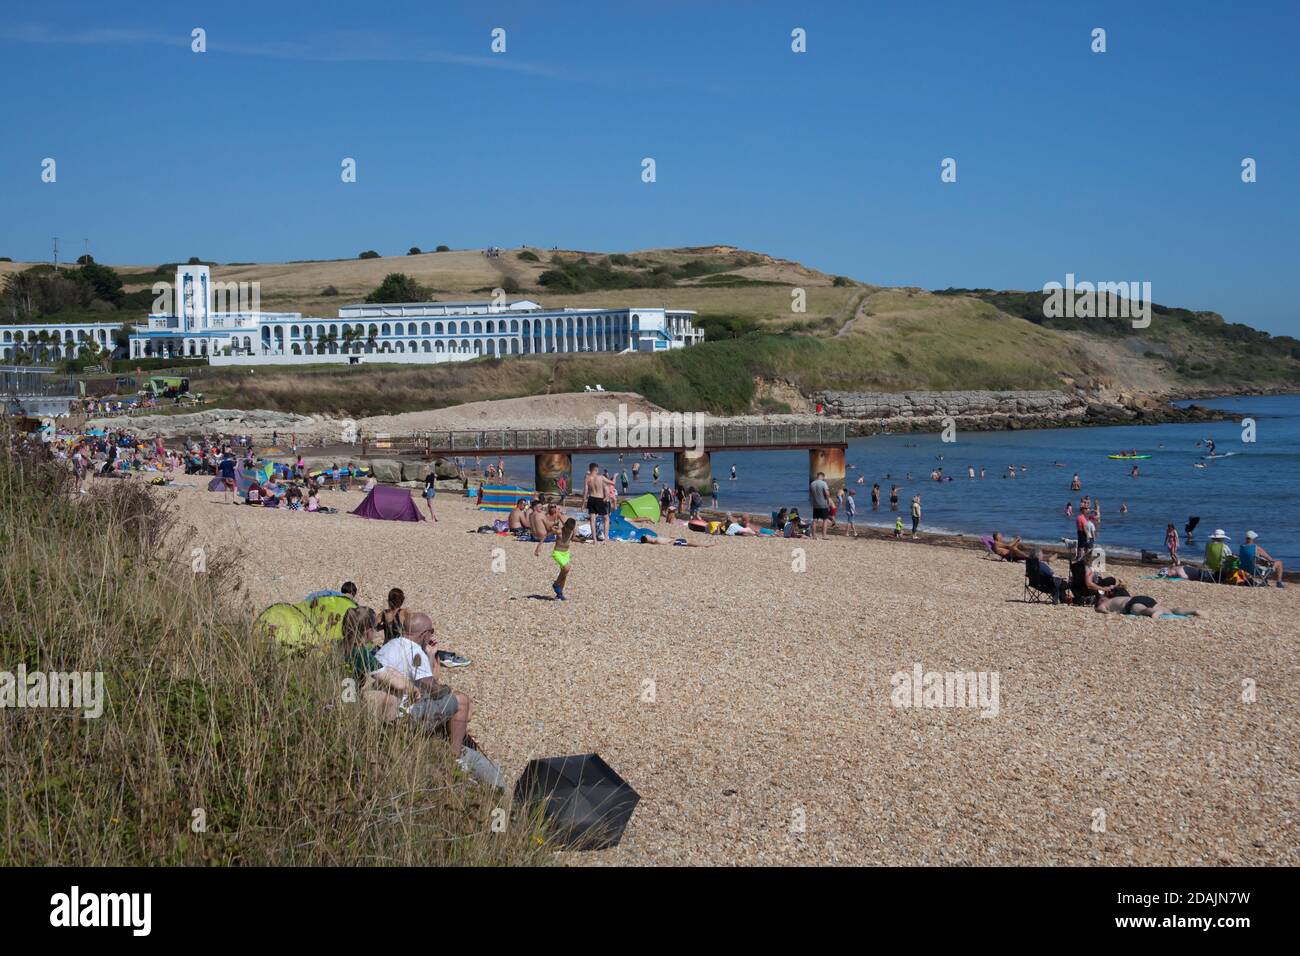 People relaxing by the sea on Overcombe Beach in Dorset in the UK, taken on the 3rd of August 2020 Stock Photo